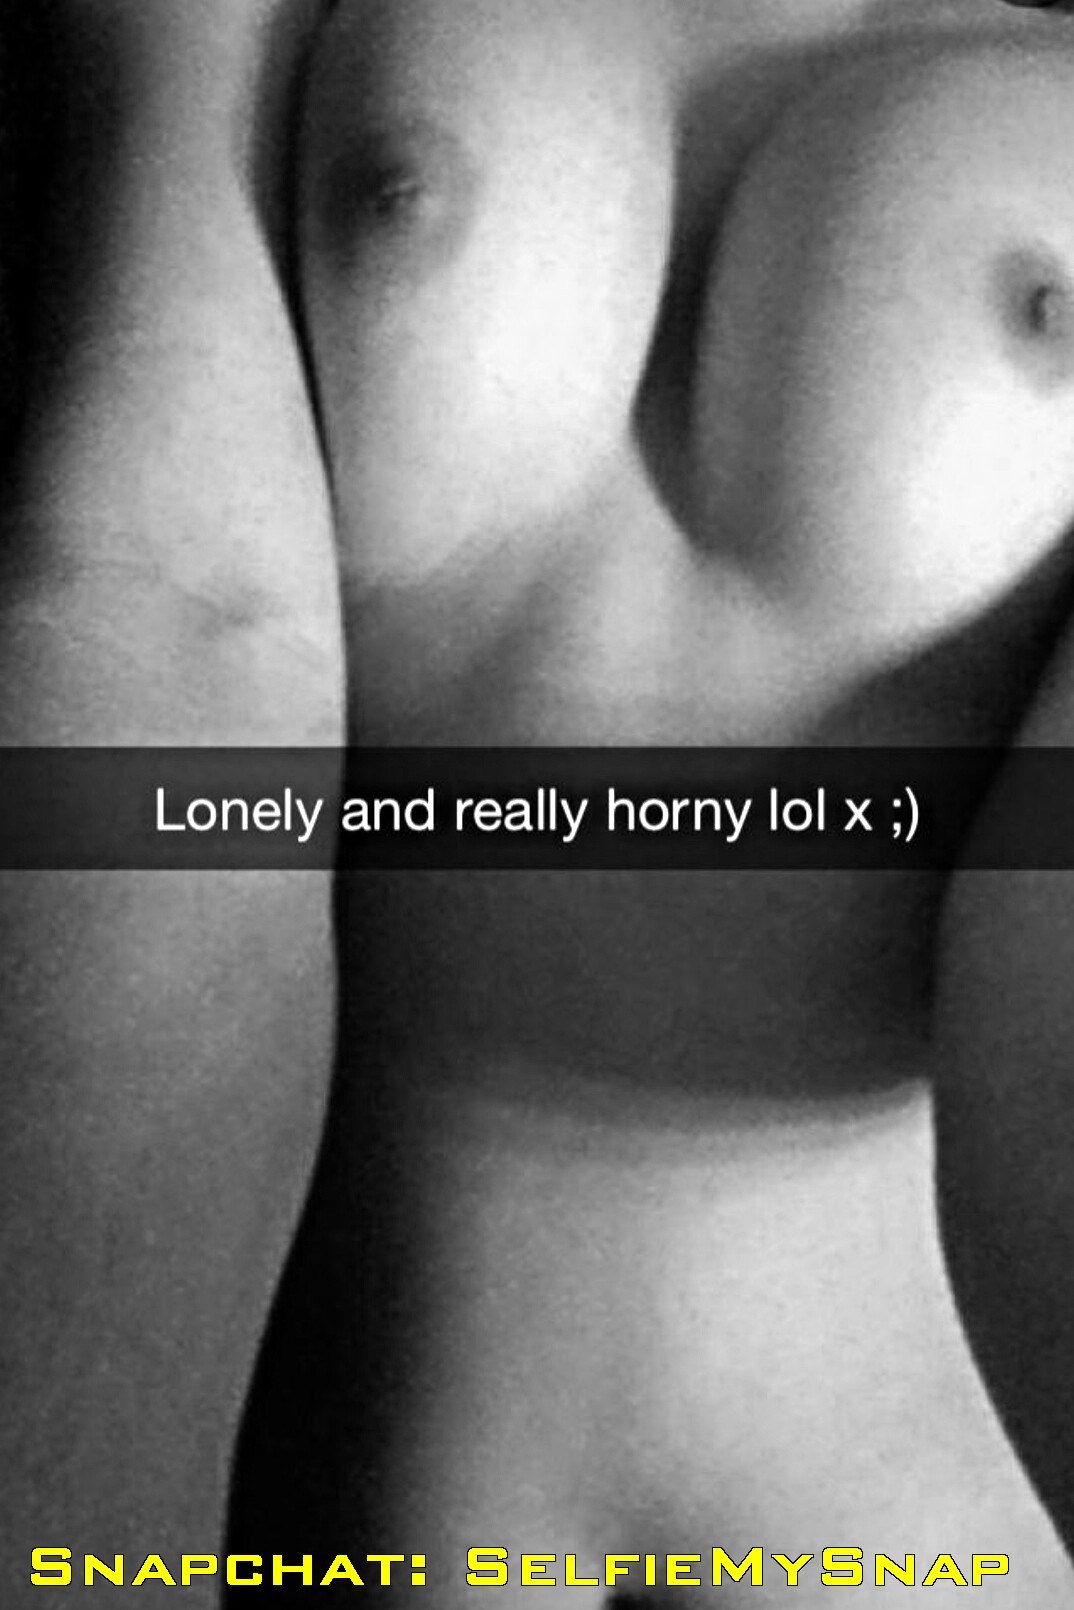 Lonely and horny